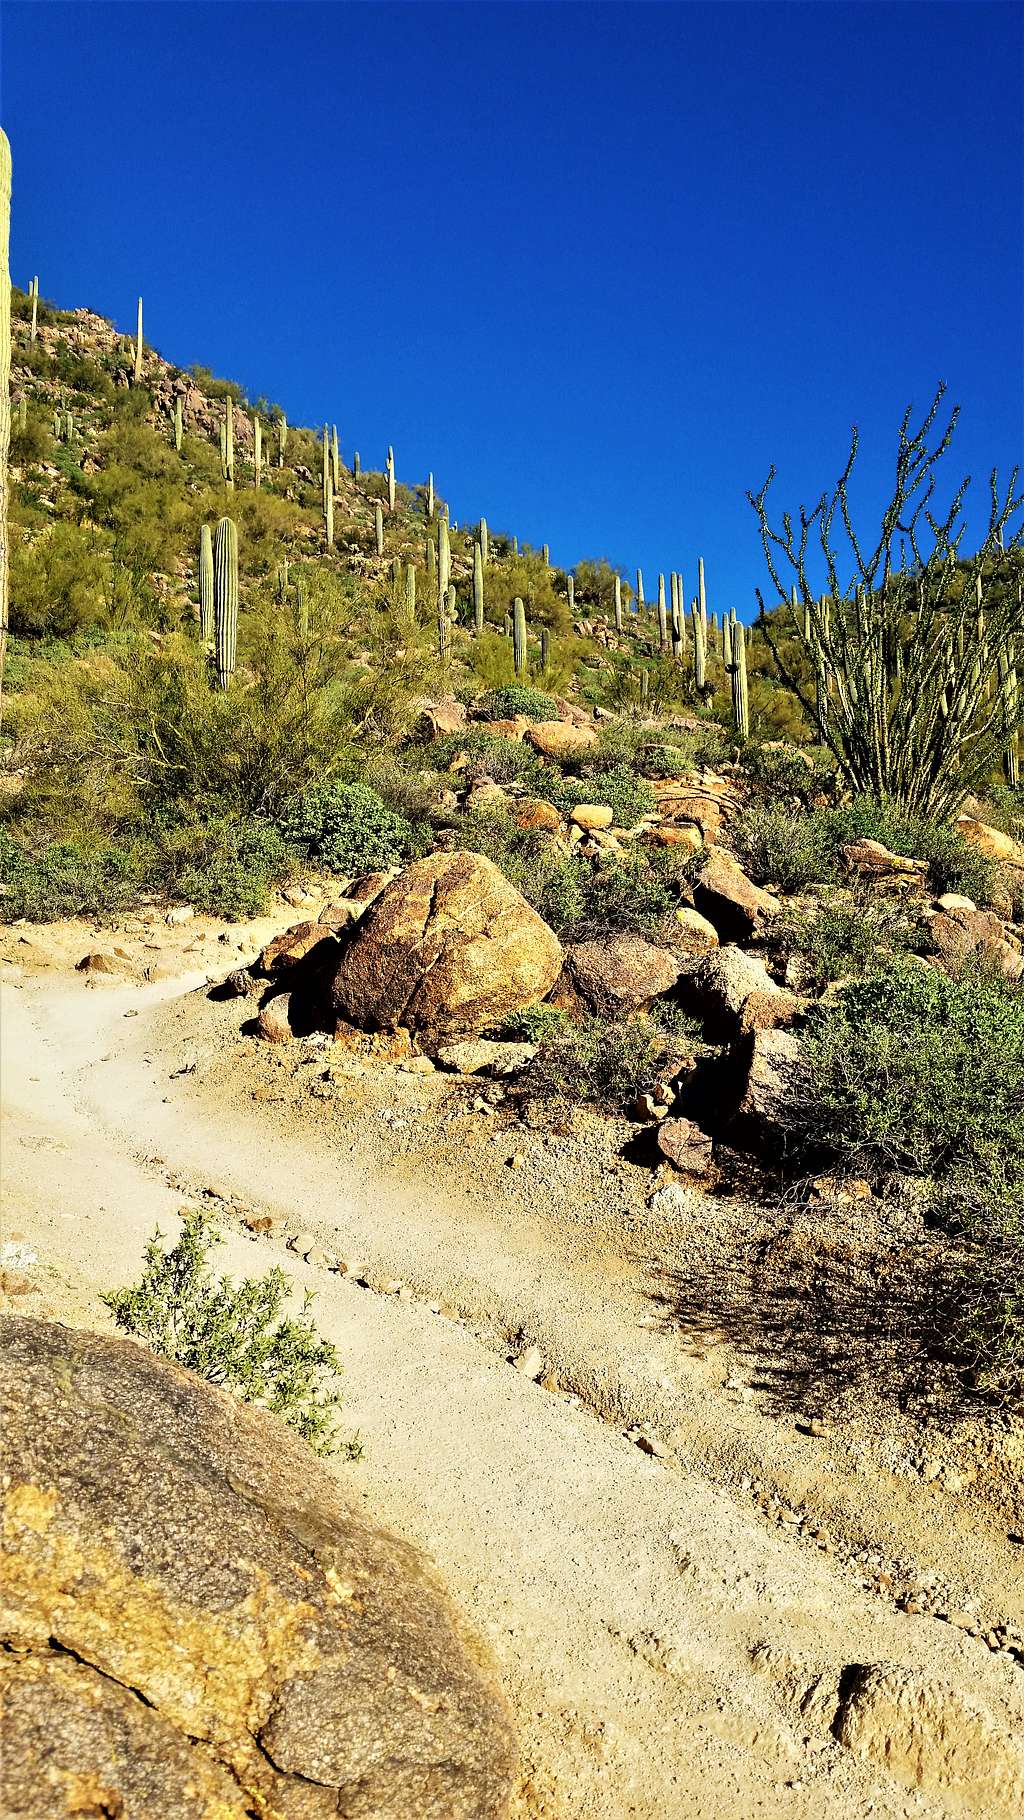 Cactus along the trail